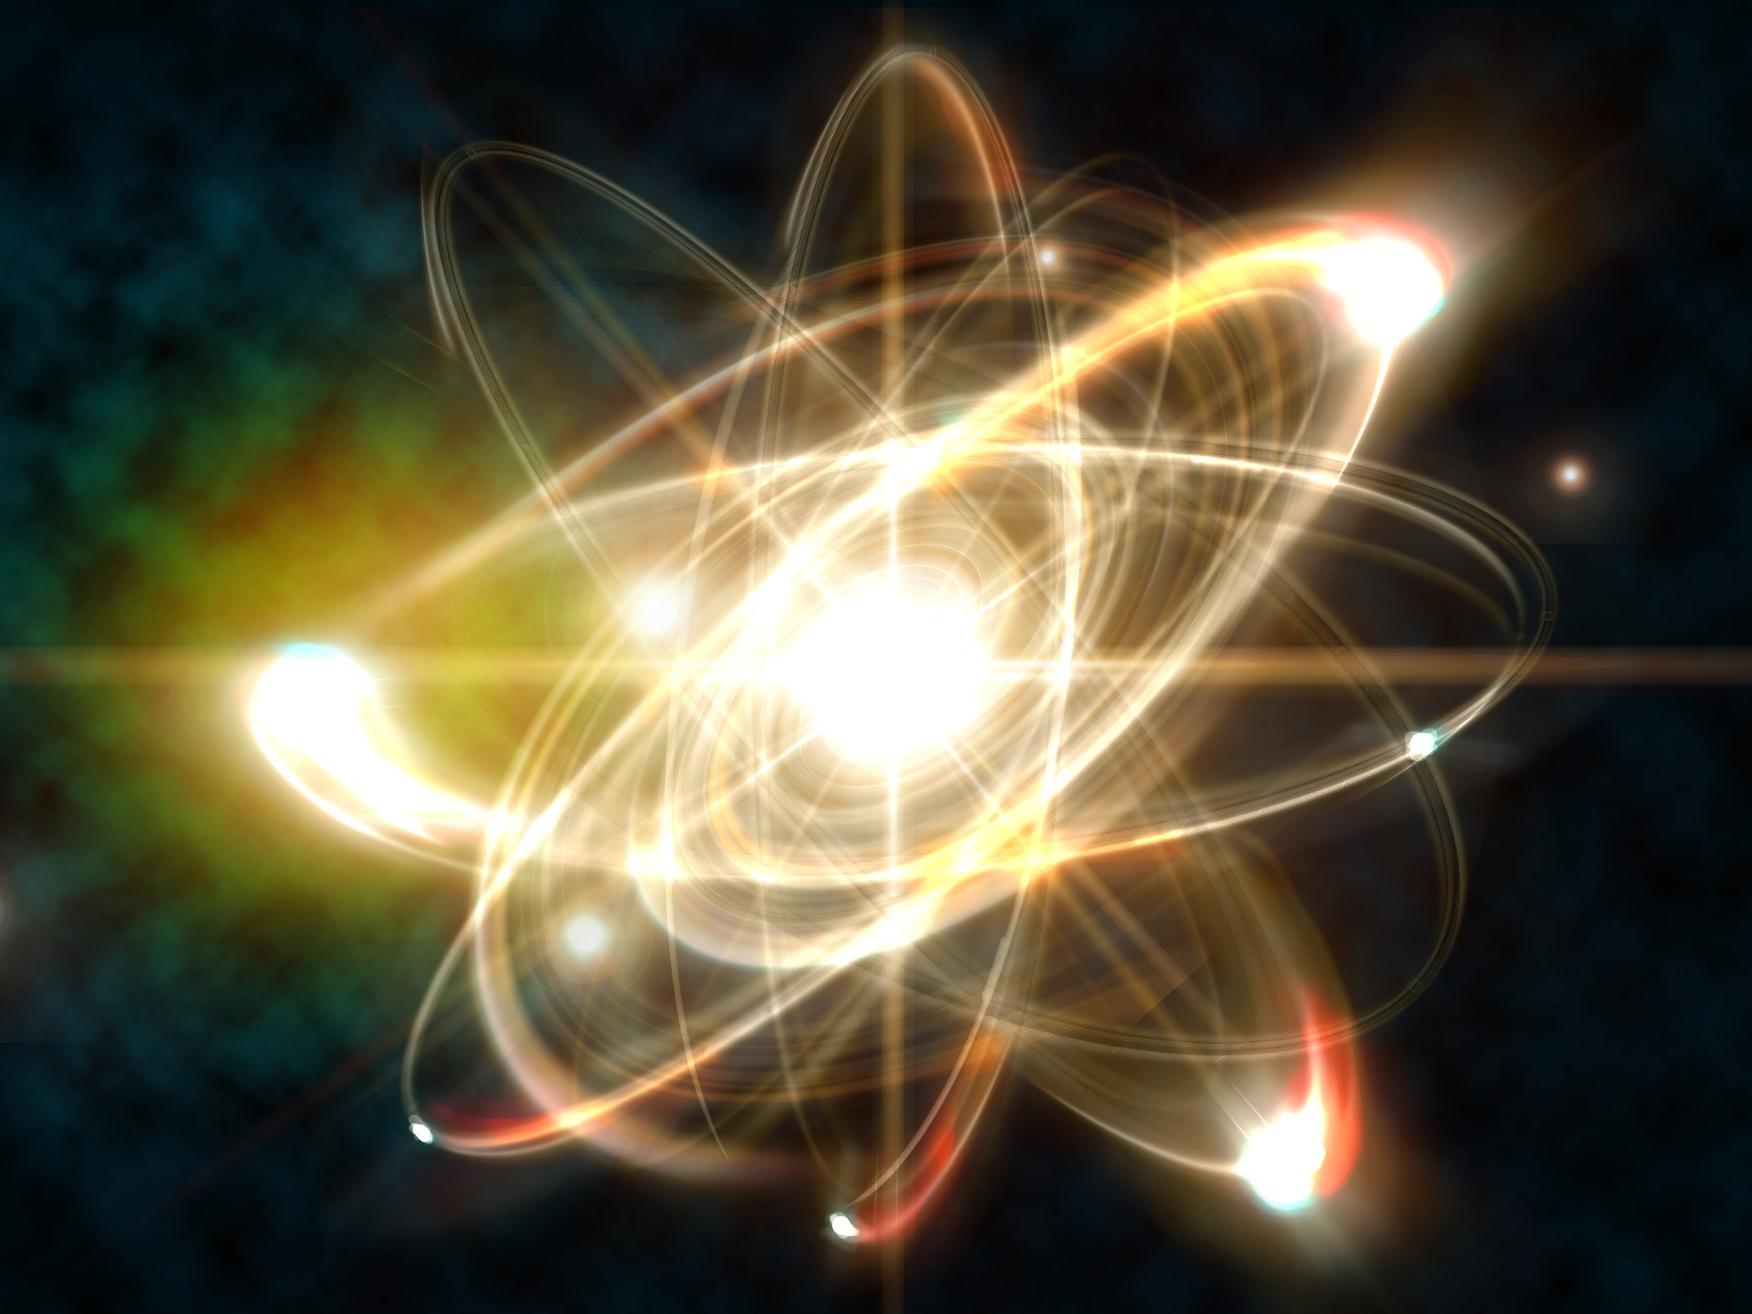 By increasing the size of an electron's orbit, physicists have found they can create "giant atoms" filled with other, normal atoms